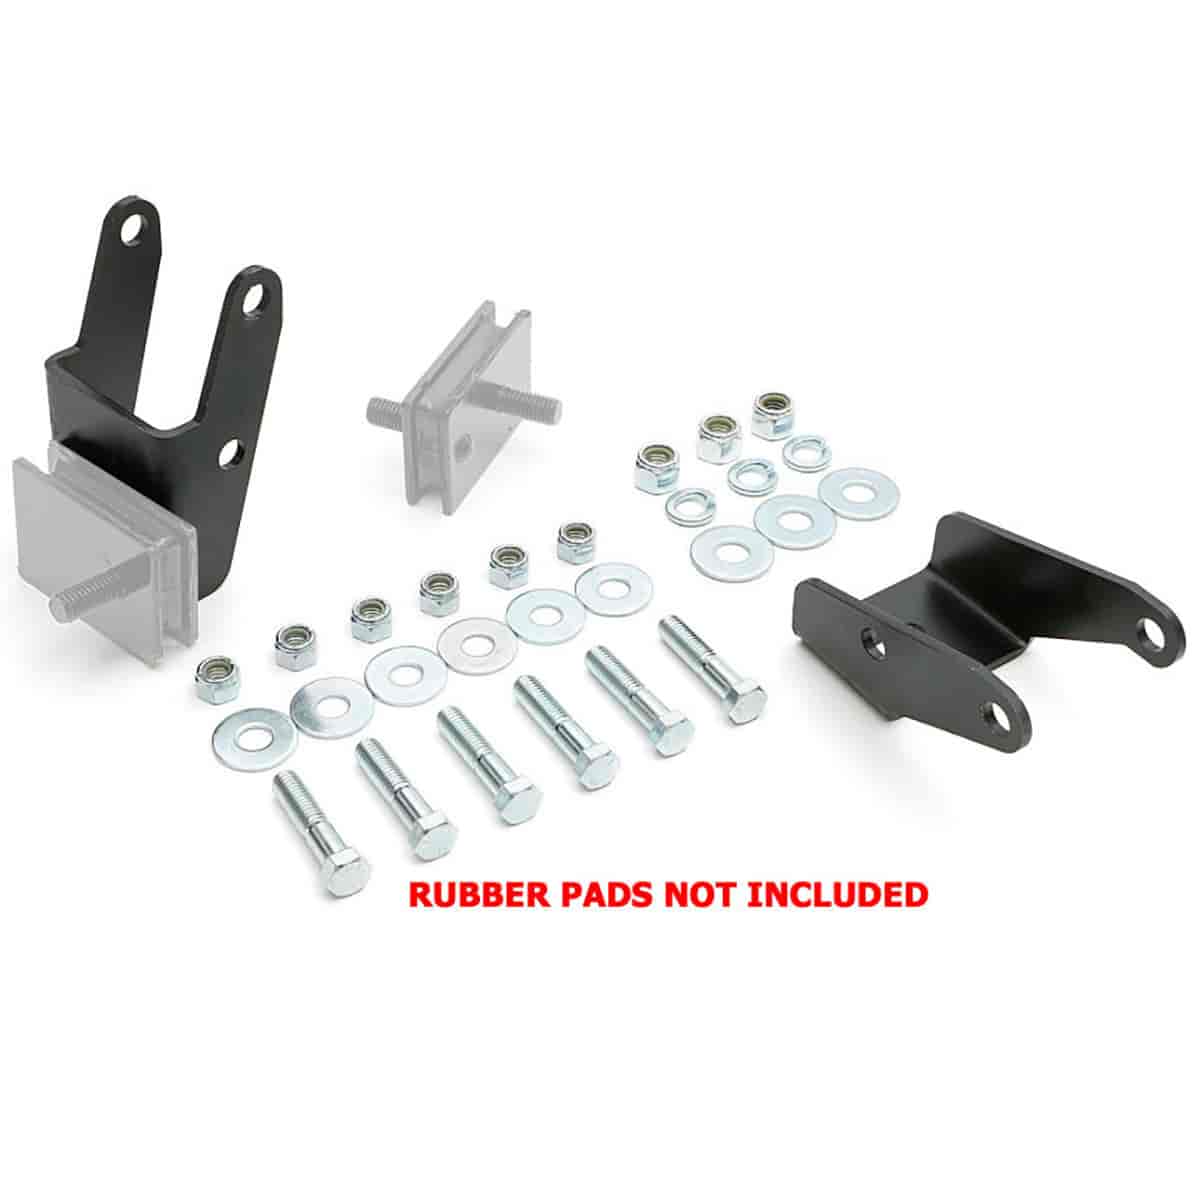 Engine Swap Motor Mount Kit Without Pads Mopar B/RB Big Block into 1967-1972 Mopar A-Body Chassis with Small Block V8 K-Member